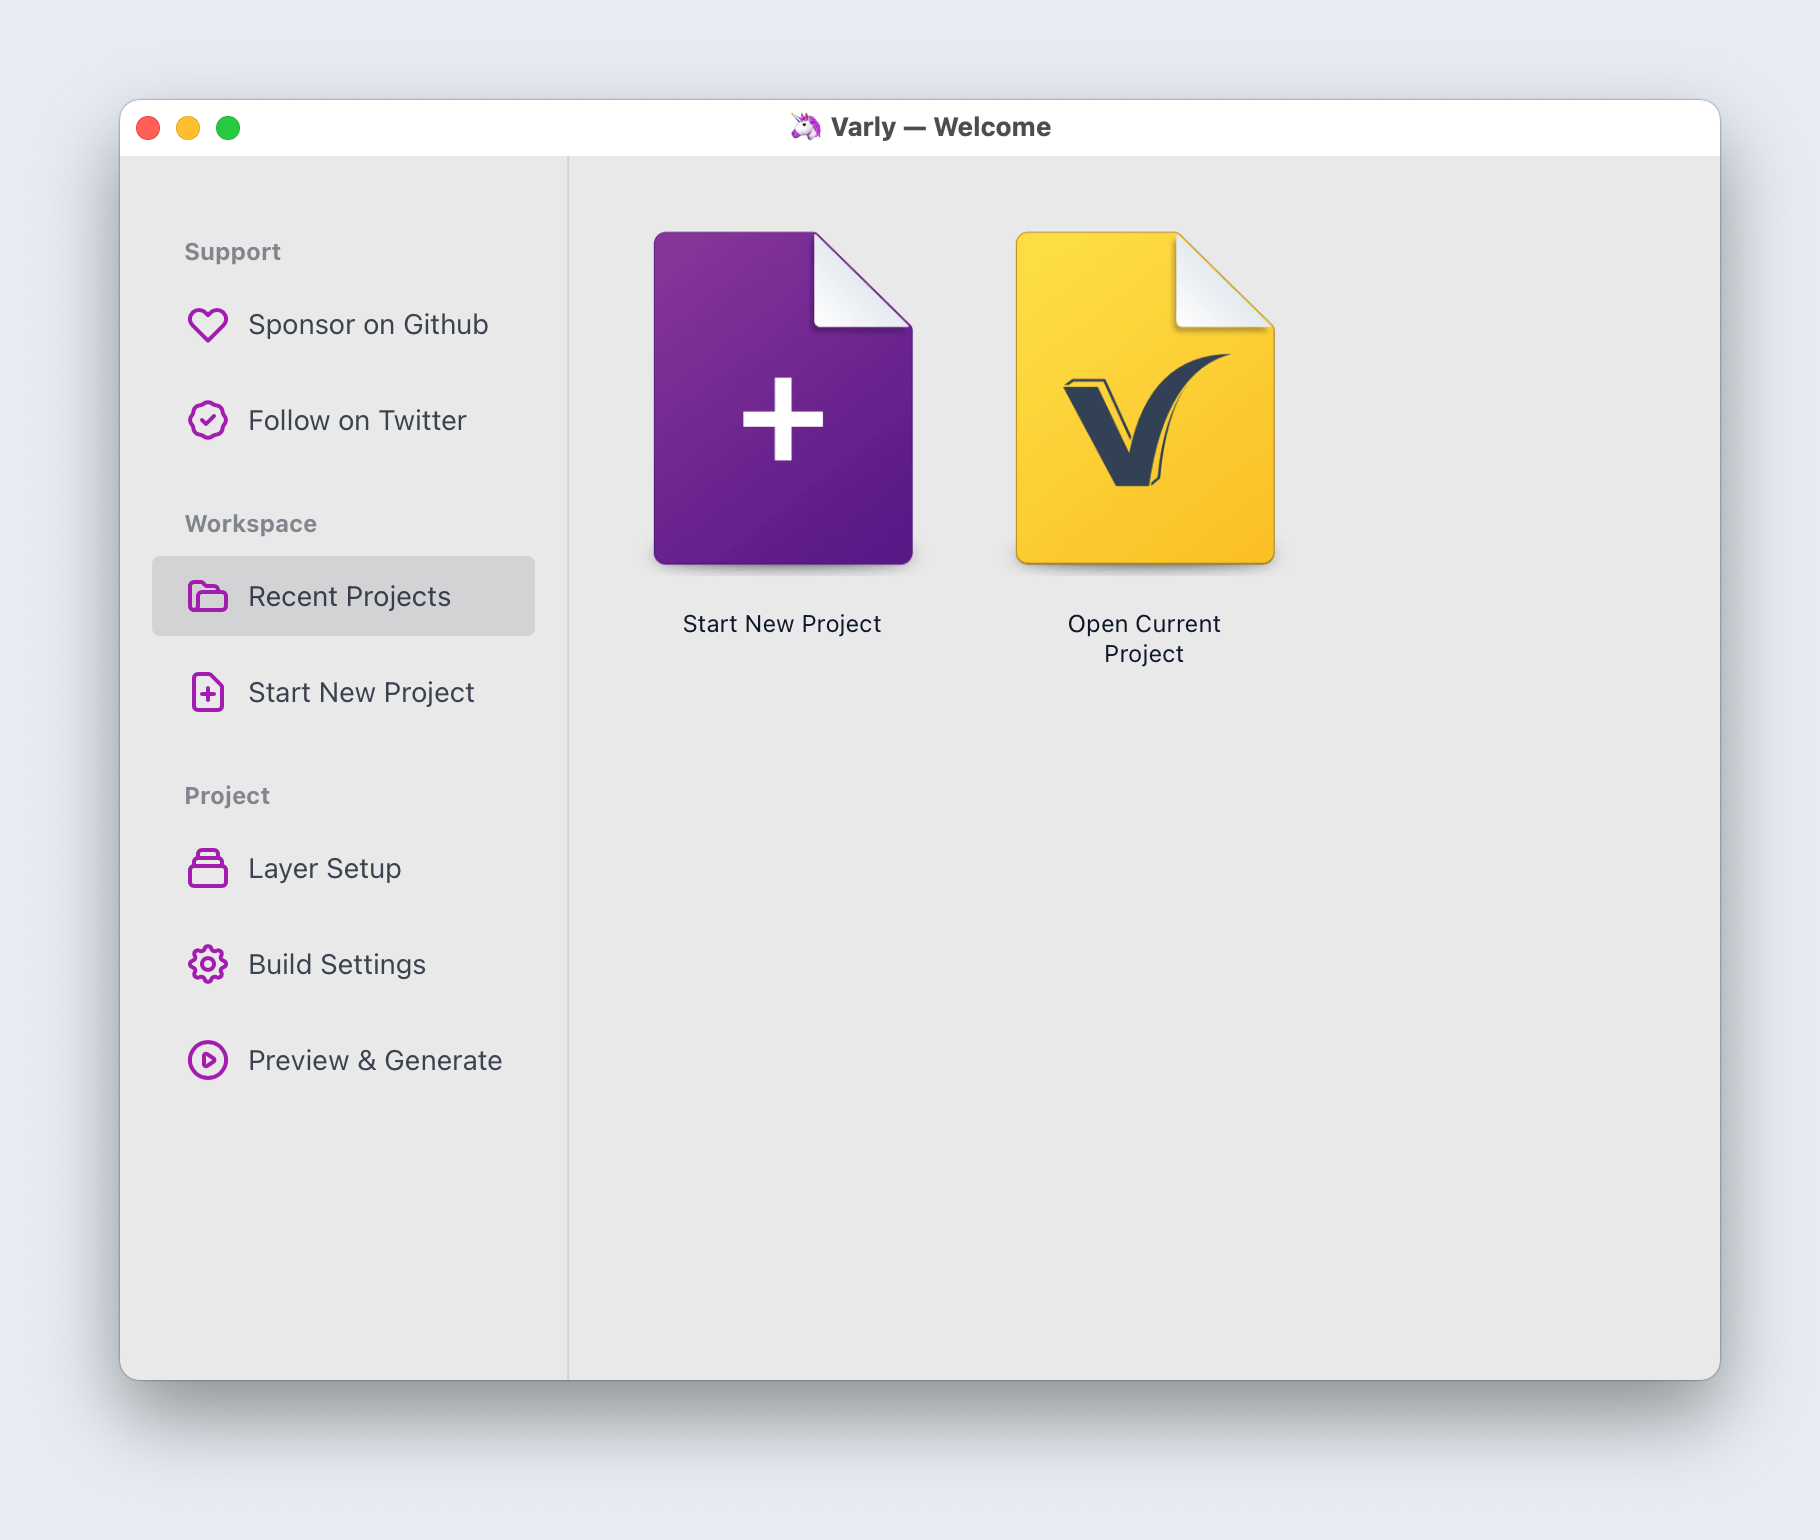 Varly for Mac - Welcome Screen